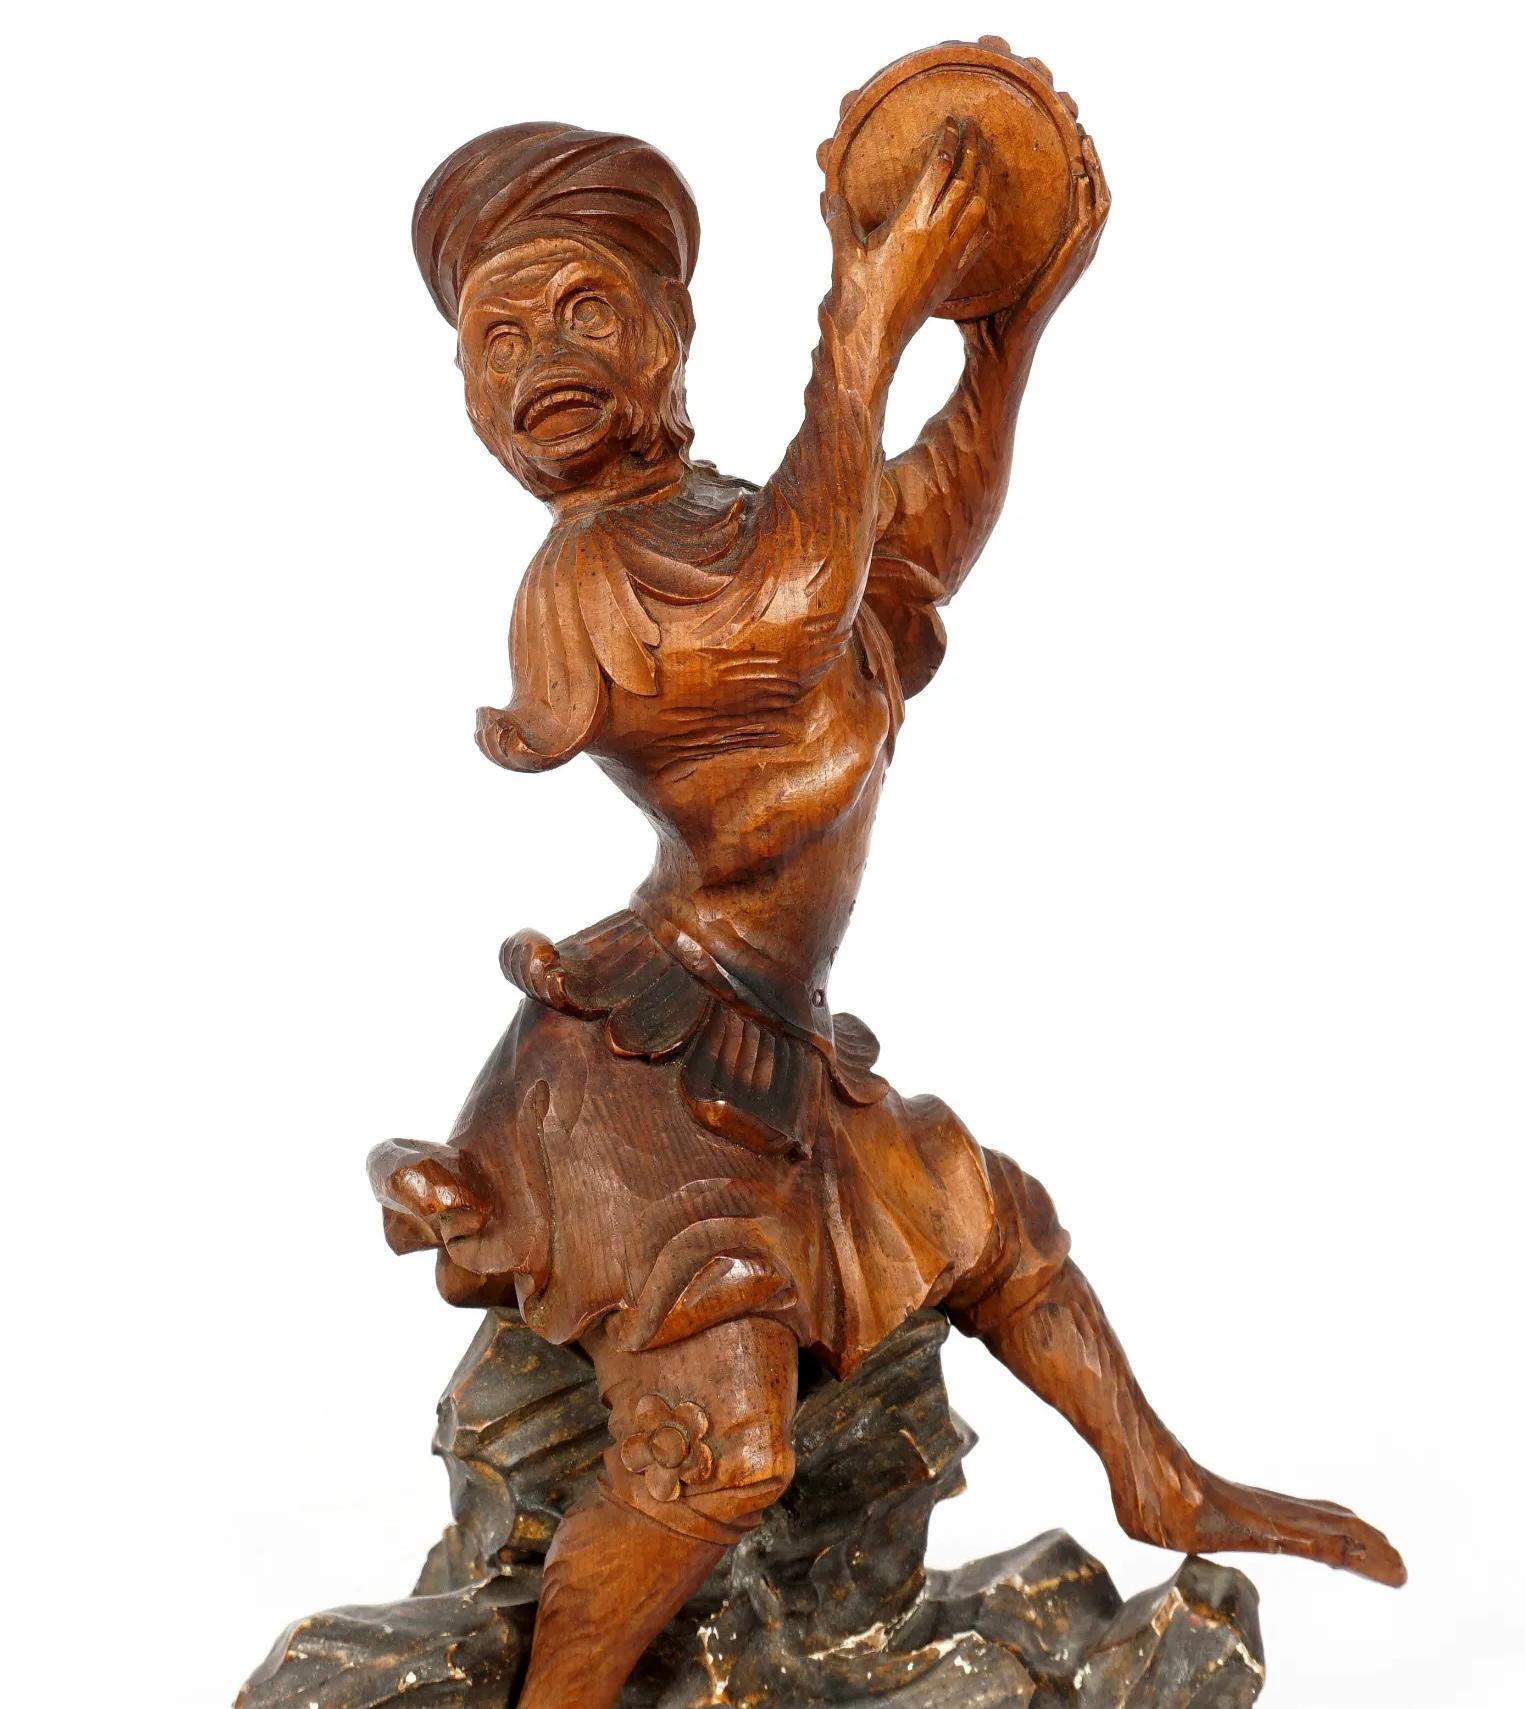 Mirror image pair of naturalistically carved figures of a seated monkey's wearing a carved giltwood cloak and turban, perched on a rocky plinth, with his hand out holding a tambourine. Amazing attention to detail and fine treatment of hair, eyes and